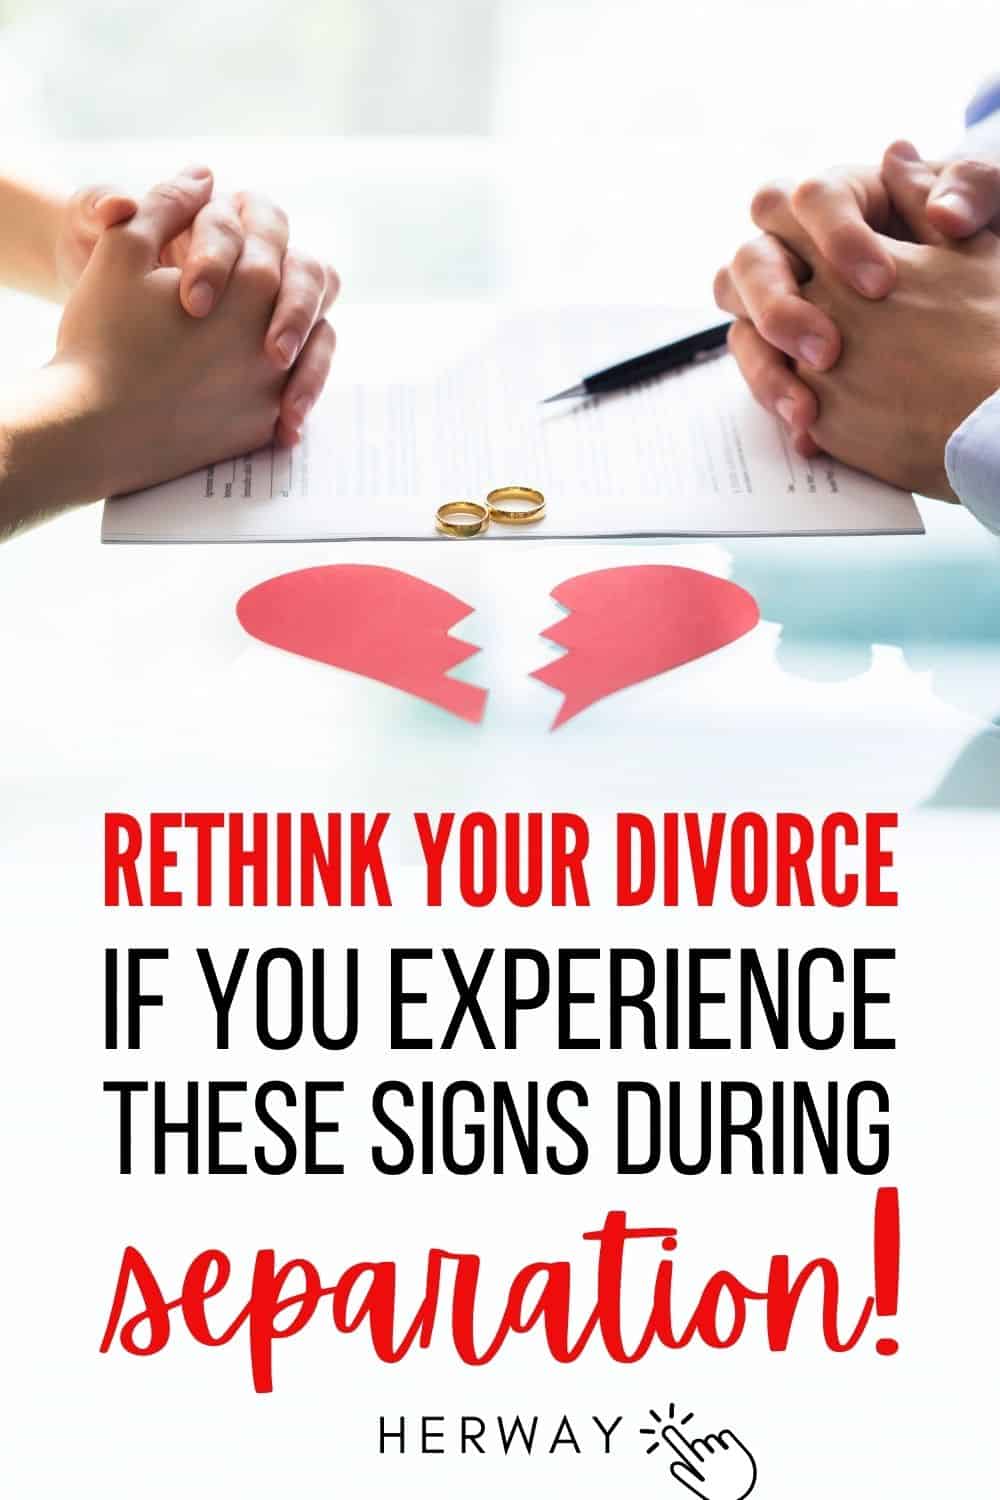 14 Positive Signs During Separation From Your Spouse Pinterest